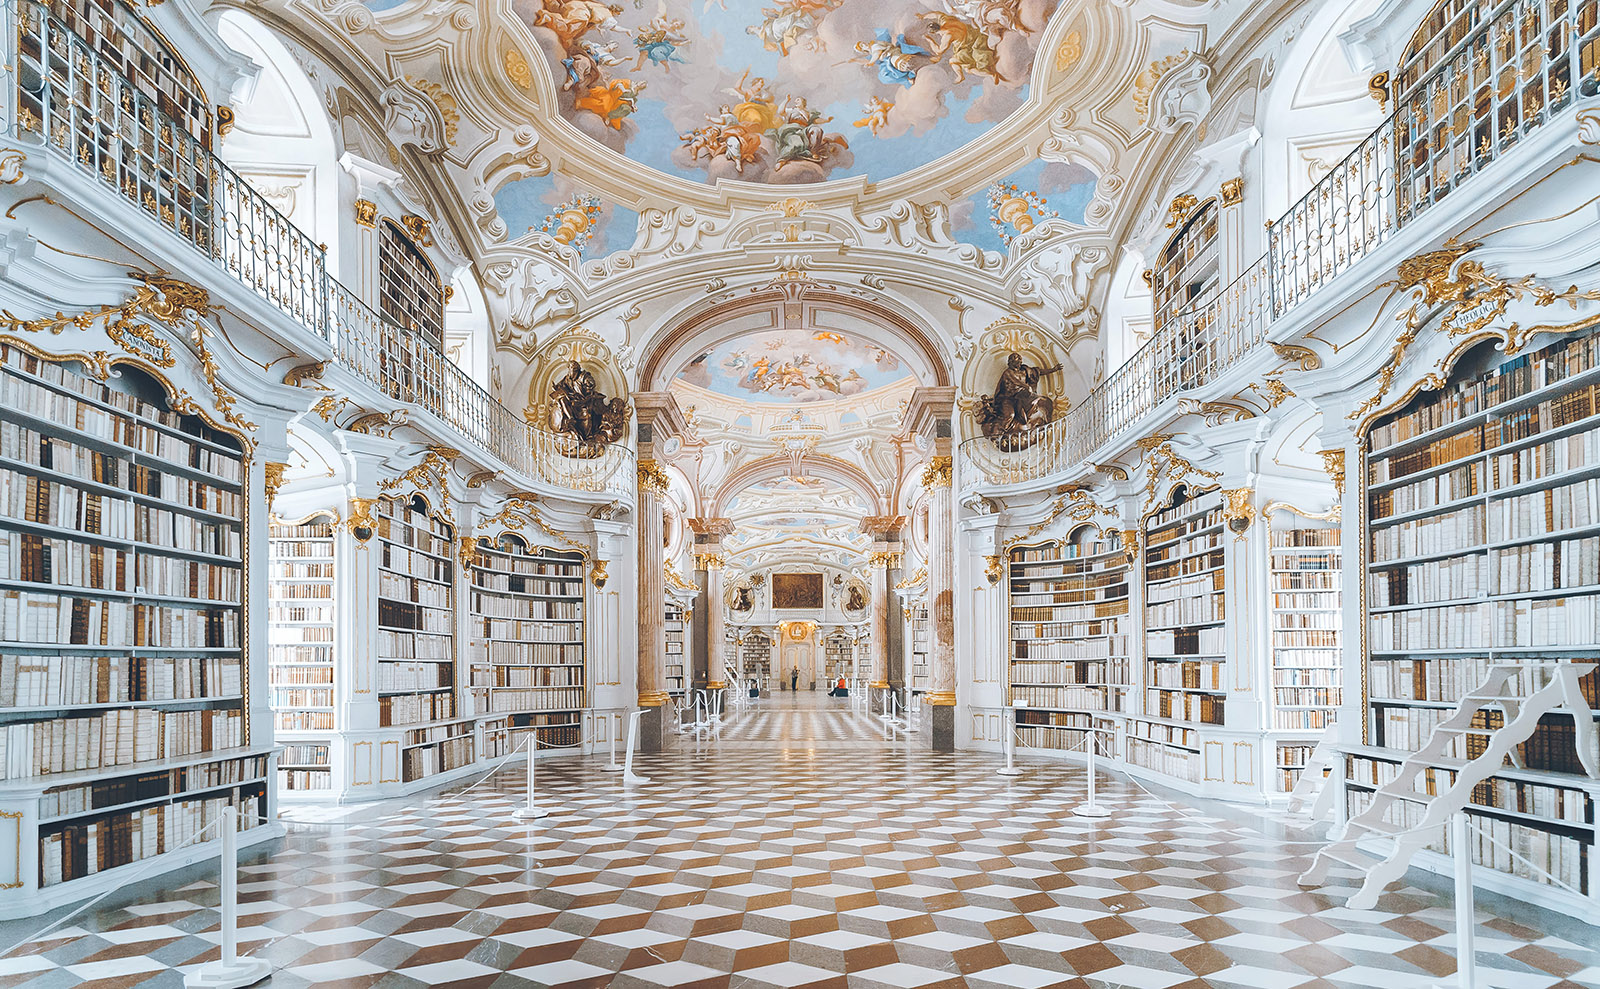 Admont Abbey Library, Locked Room Mysteries, World Cuisine & More: Endnotes 05 March